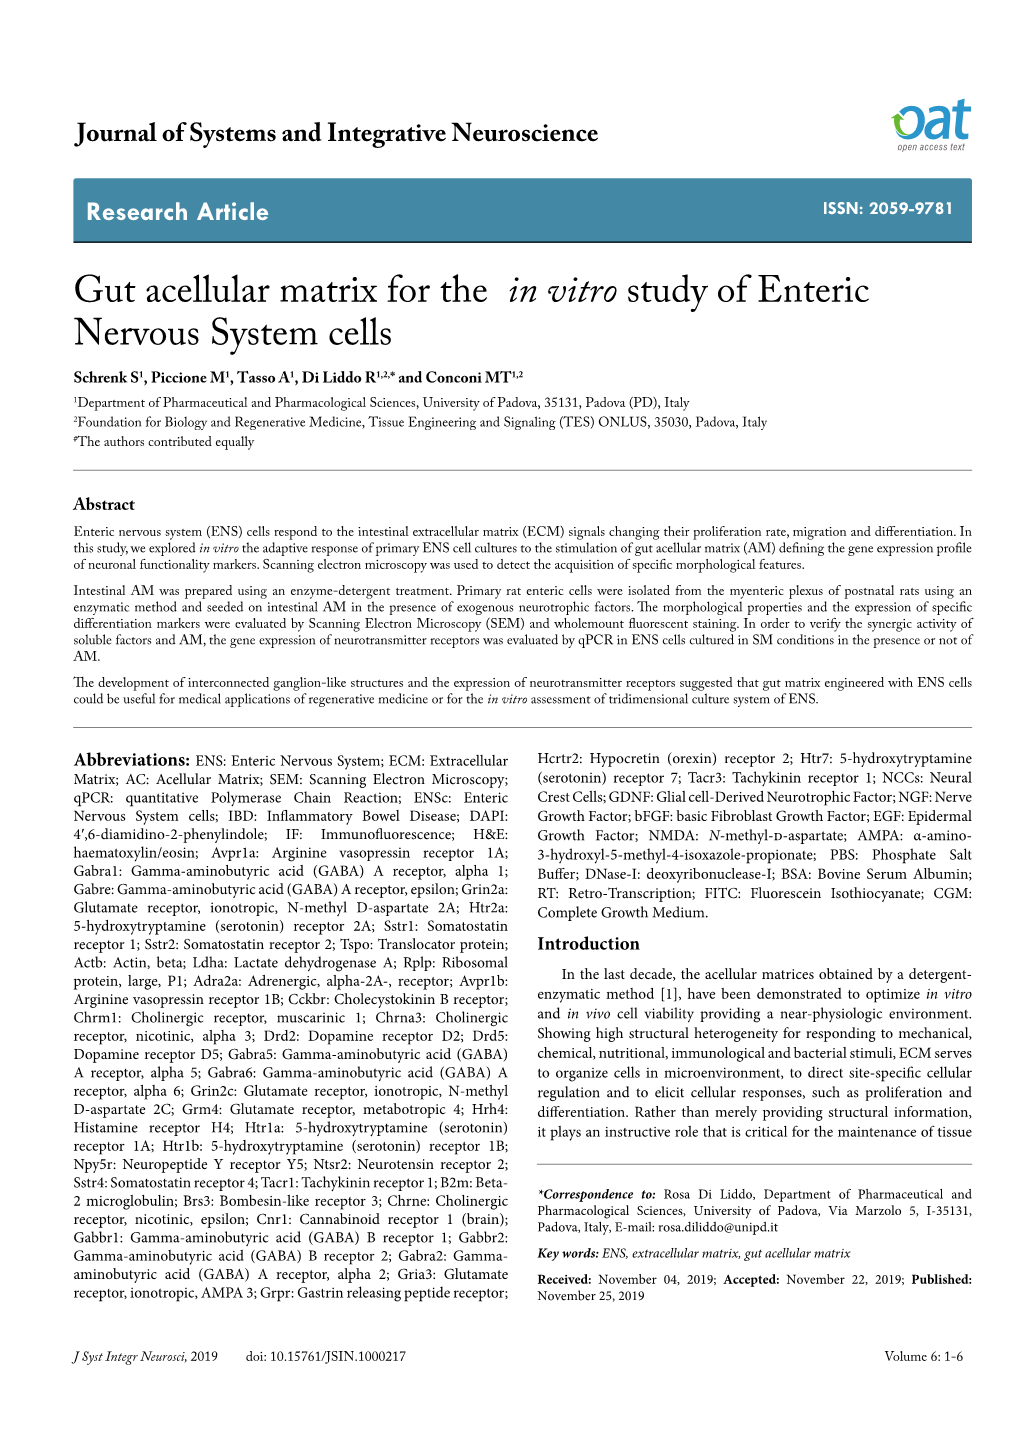 Gut Acellular Matrix for the in Vitro Study of Enteric Nervous System Cells